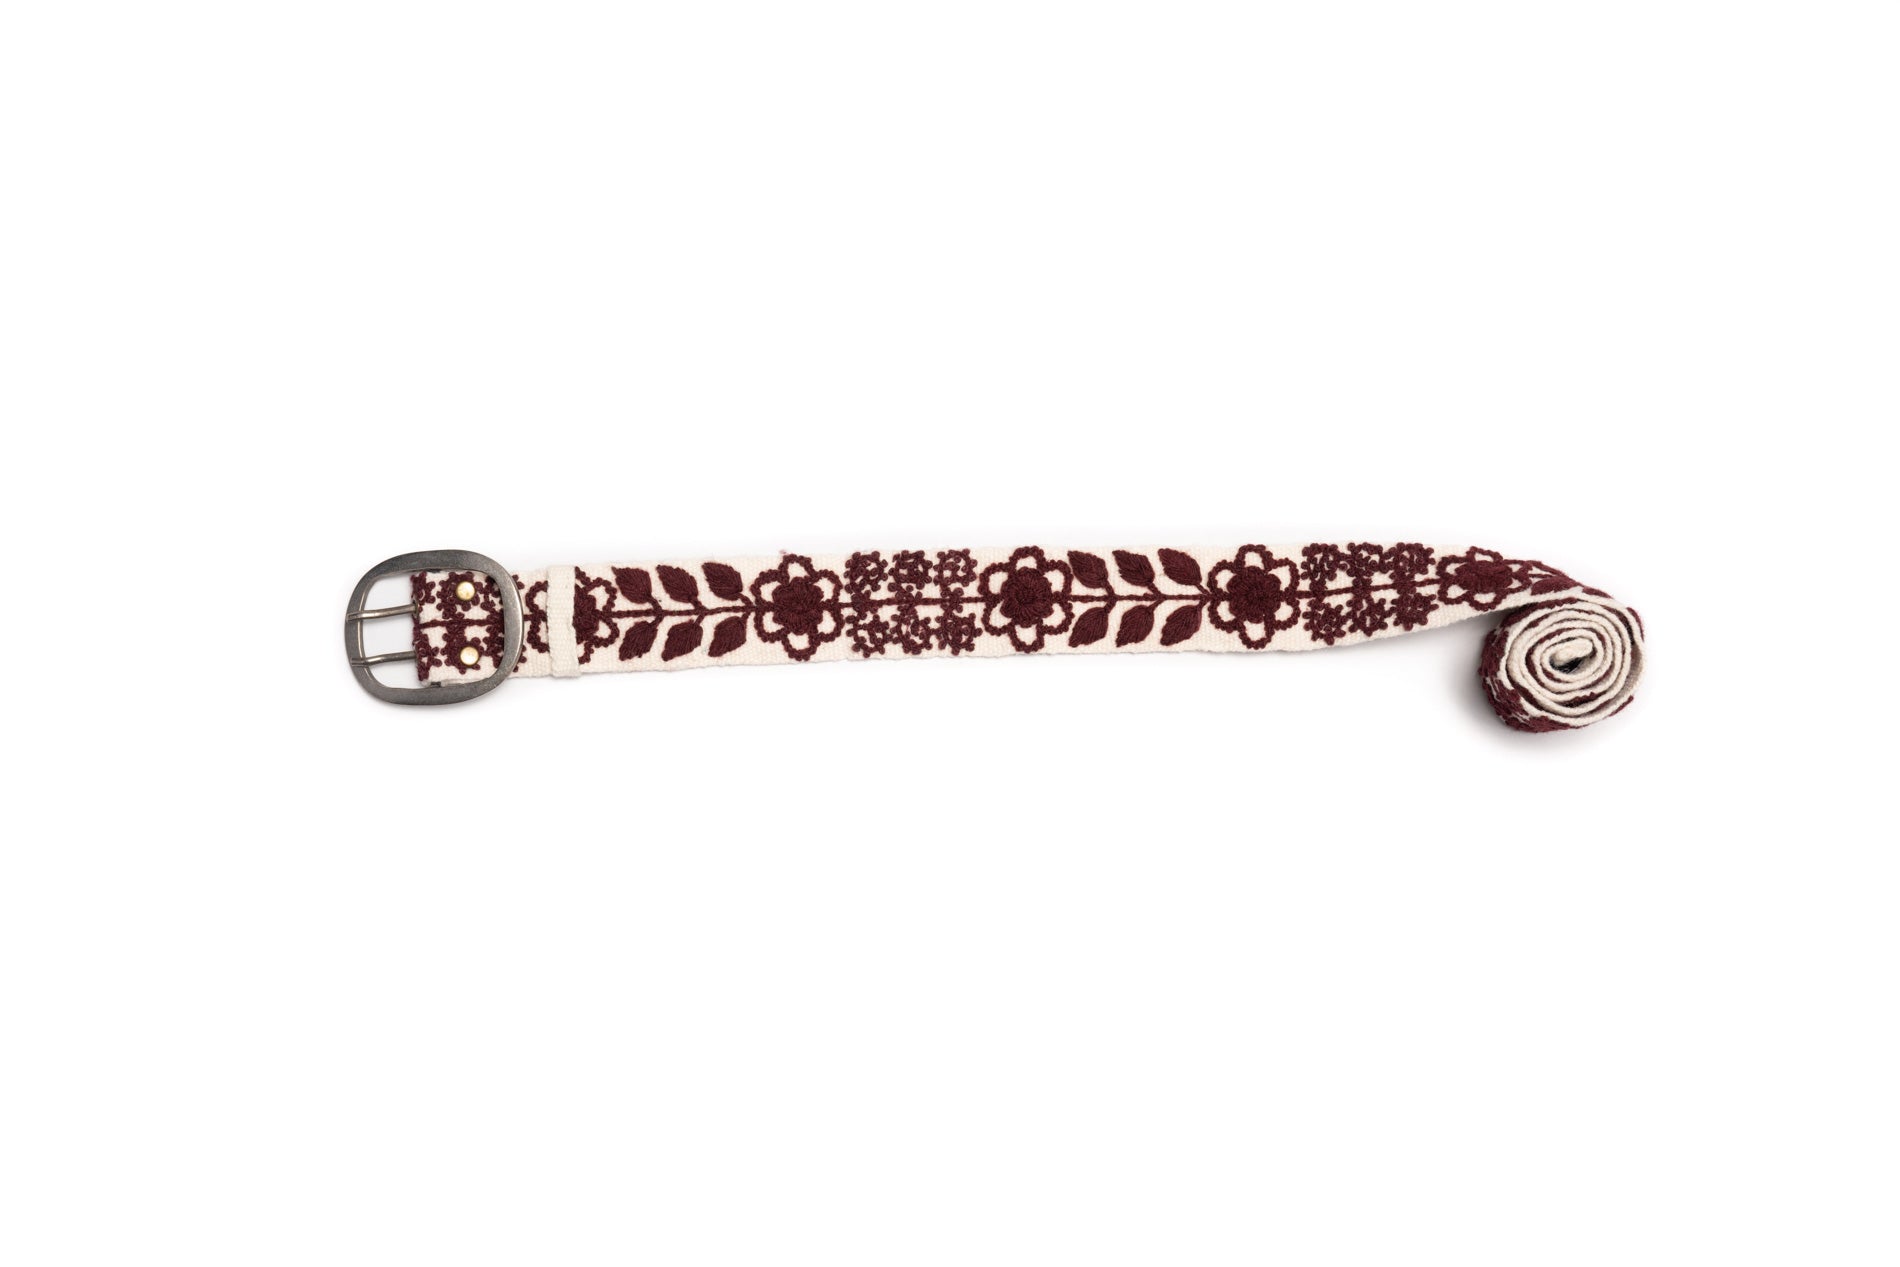 Wendi Hand Embroidered Belt with cream wool fabric and maroon floral and leaves 